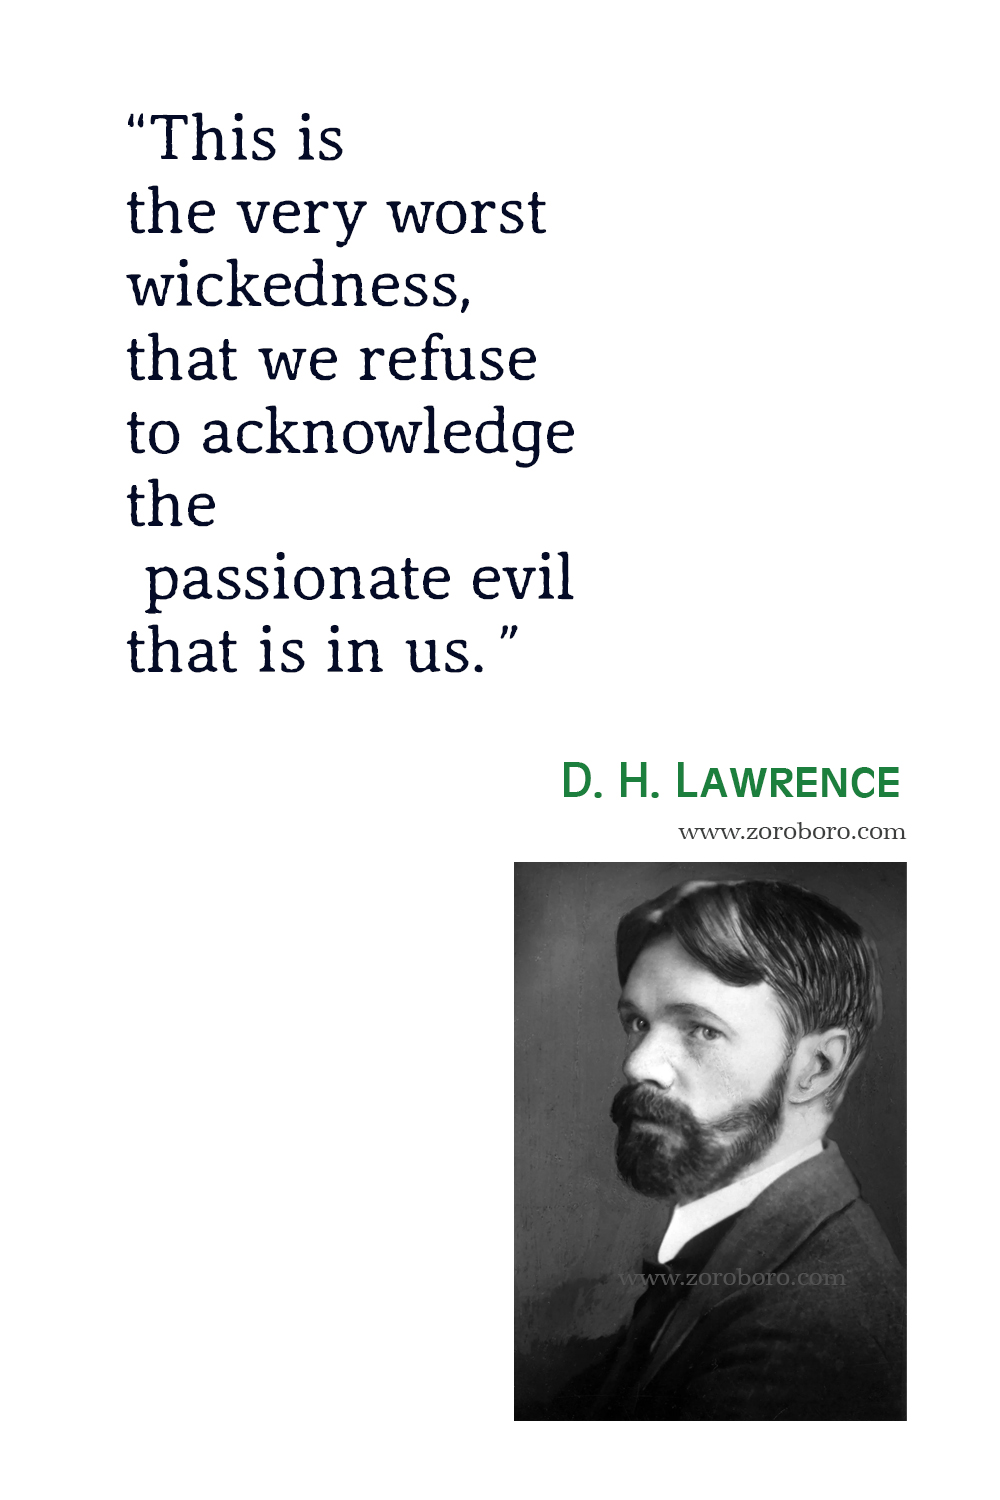 D.H. Lawrence Quotes, D.H. Lawrence Lady Chatterley's Lover Quotes, D.H. Lawrence Poems, D.H. Lawrence Poetry, D.H. Lawrence Philosophy, D.H. Lawrence Books.